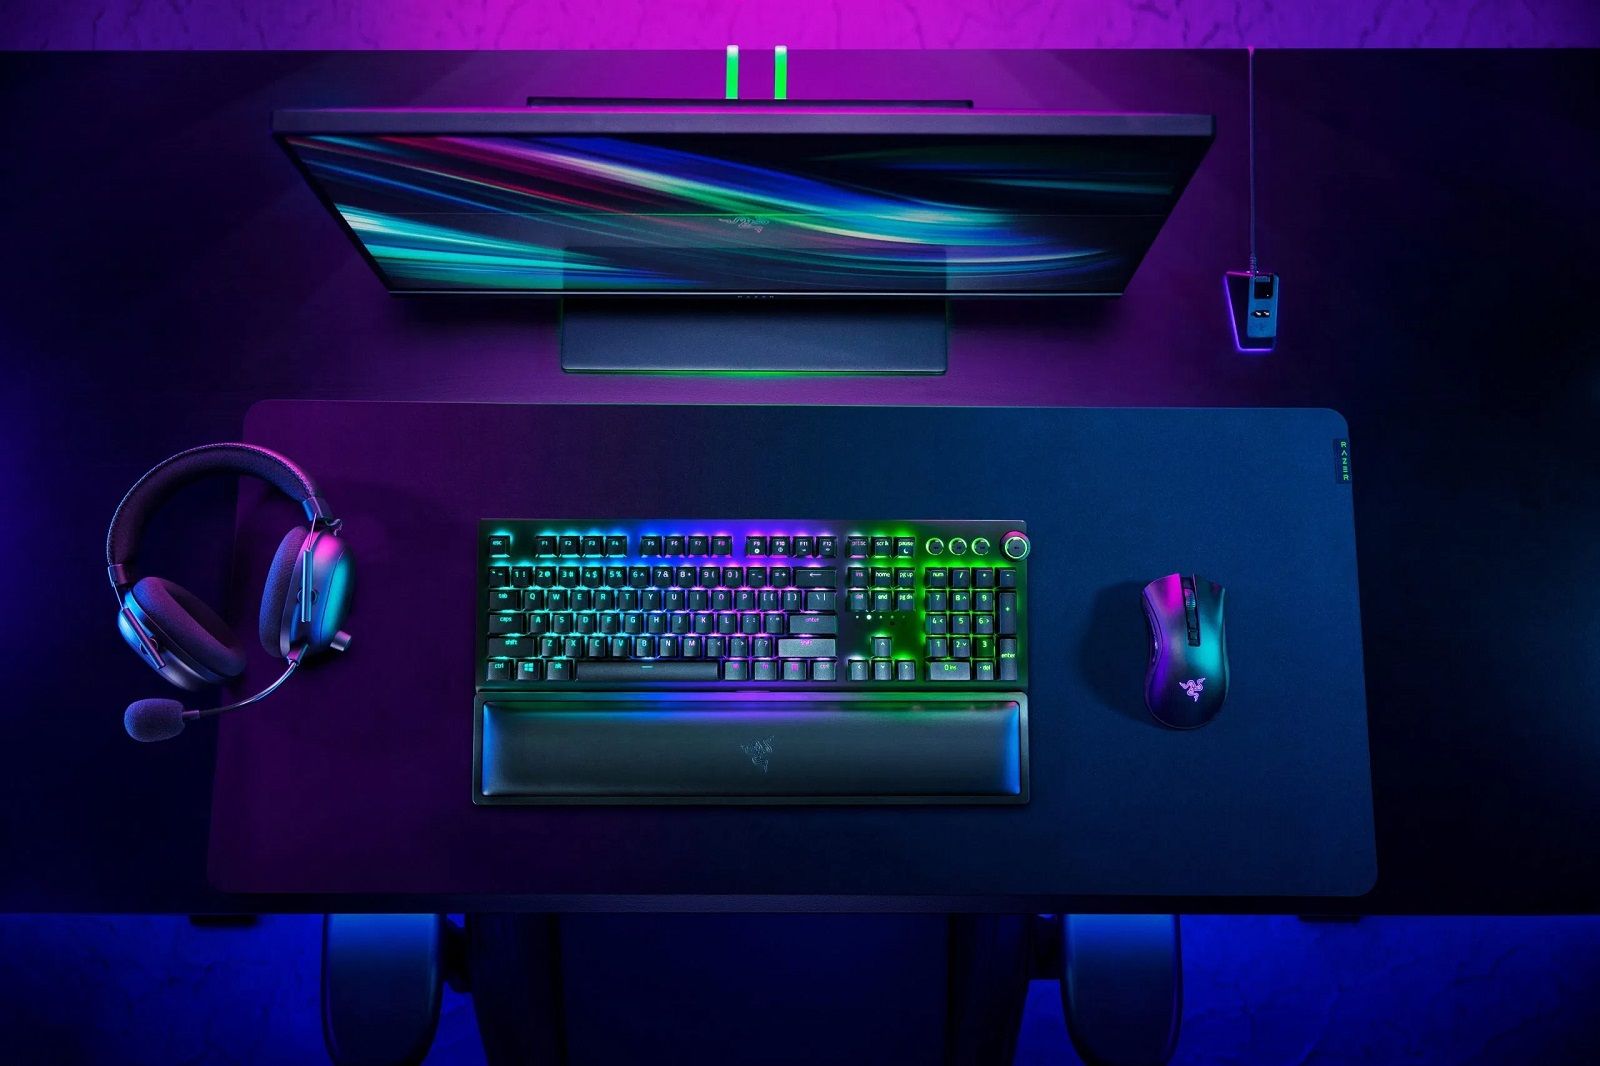 Get up to 50% off Razer PC gear this Amazon Prime Day photo 1